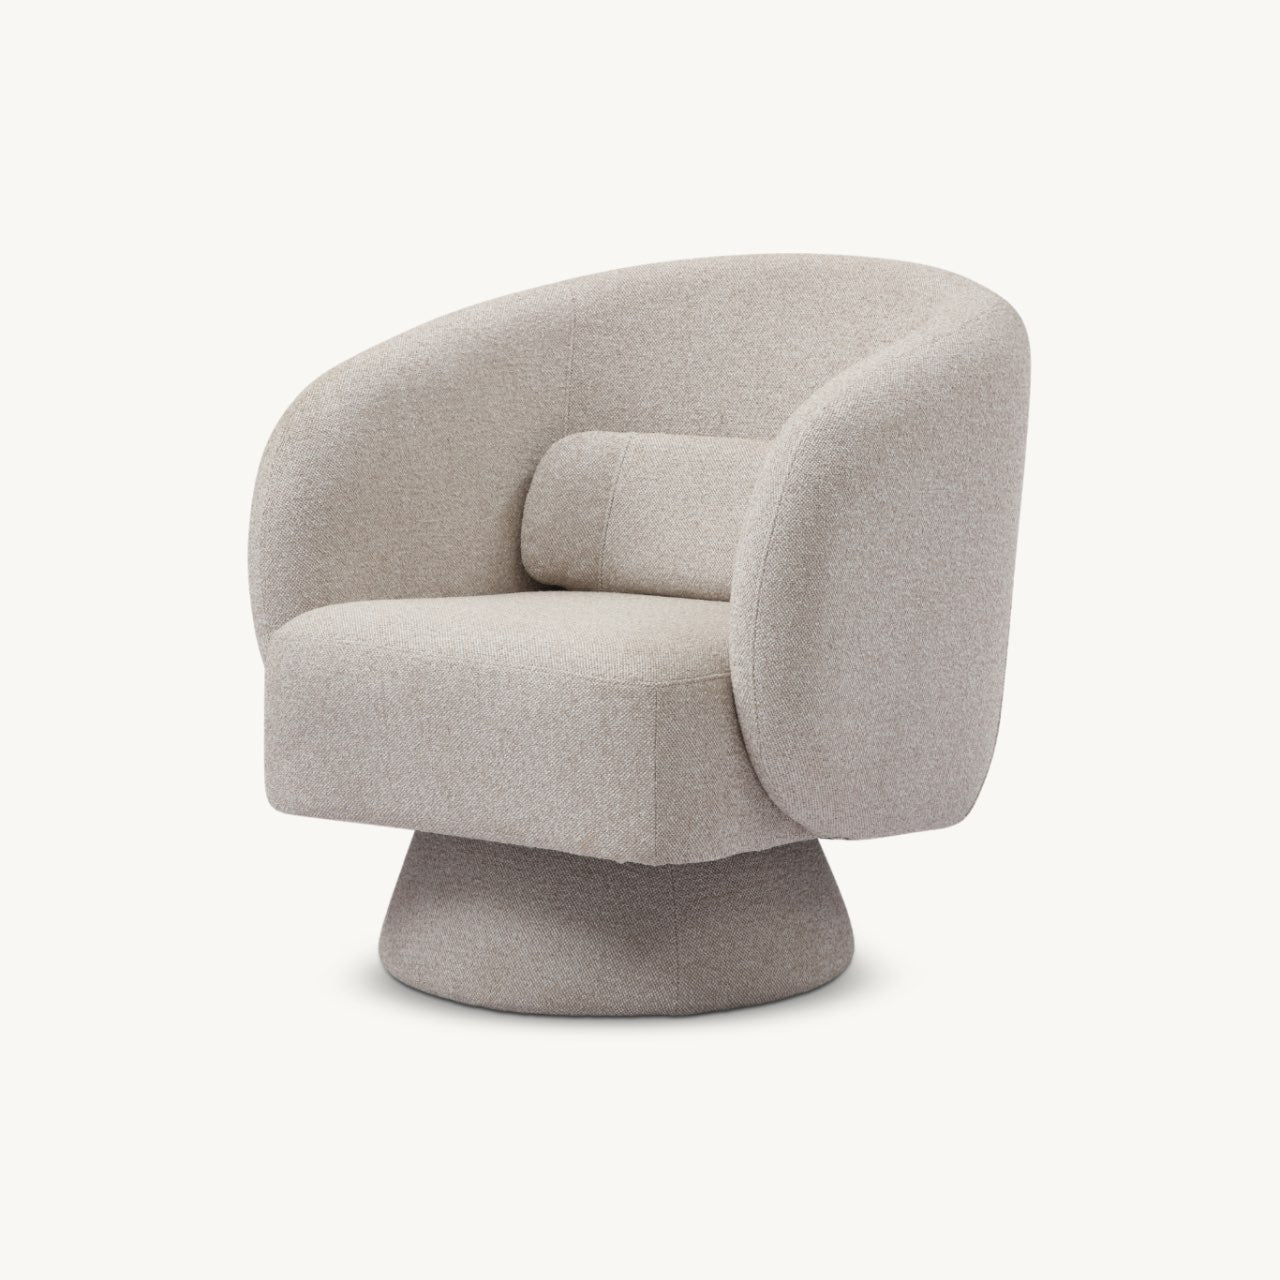 curved modern armchair with central podium foot upholstered in boucle fabric